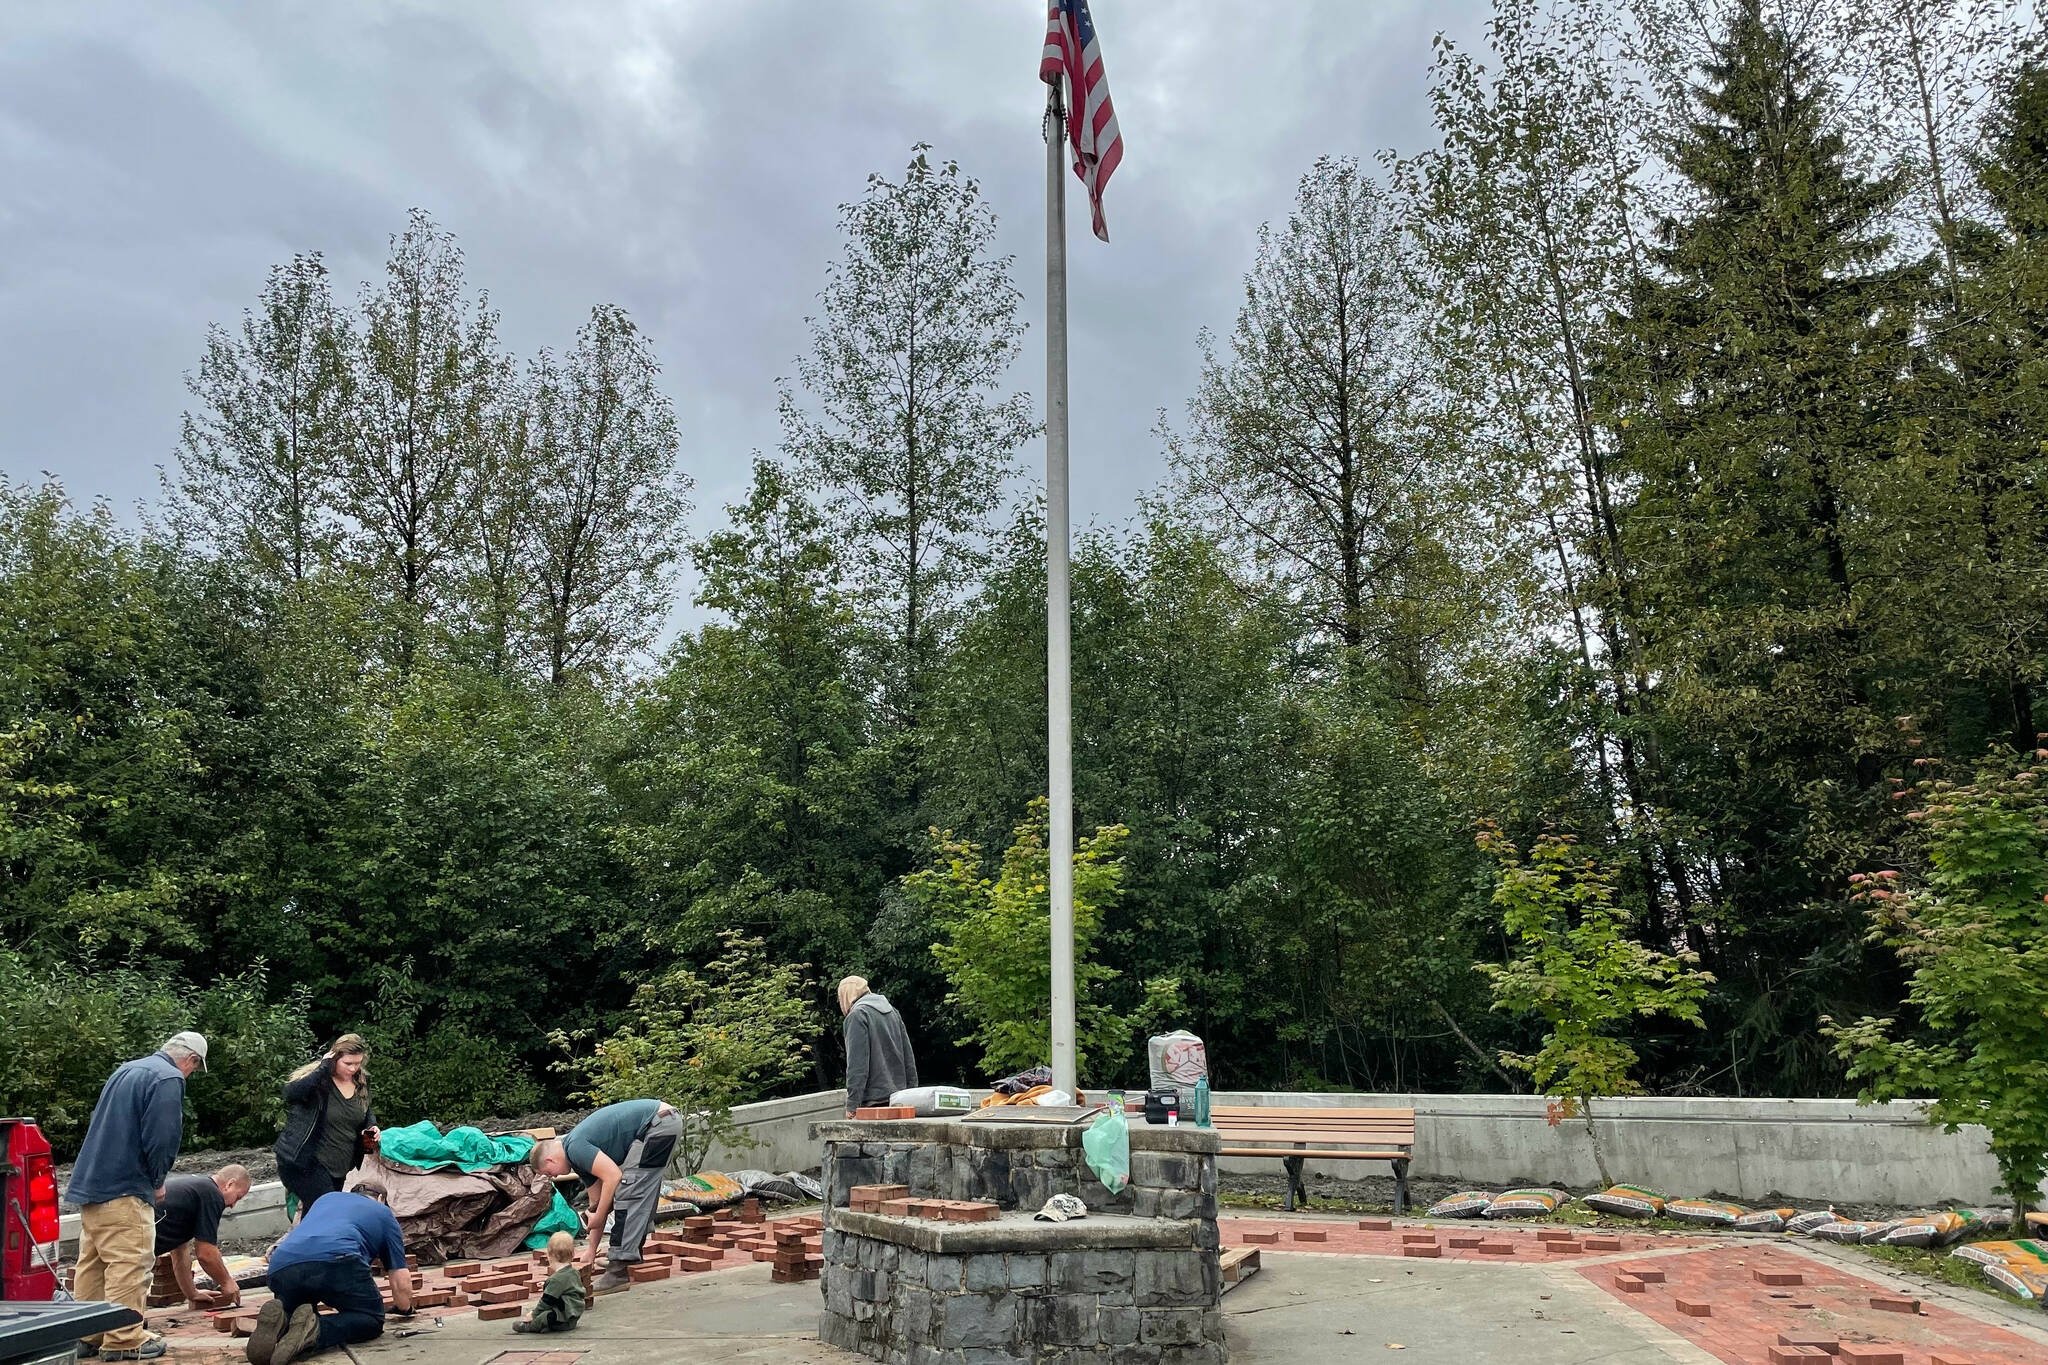 Juneau Glacier Valley Rotary Club’s 9/11 memorial, shown here undergoing beautification and final preparations before the ceremony, will be the site of the organization’s ceremony for the 20th anniversary of the attacks on Saturday. (Michael S. Lockett / Juneau Empire)